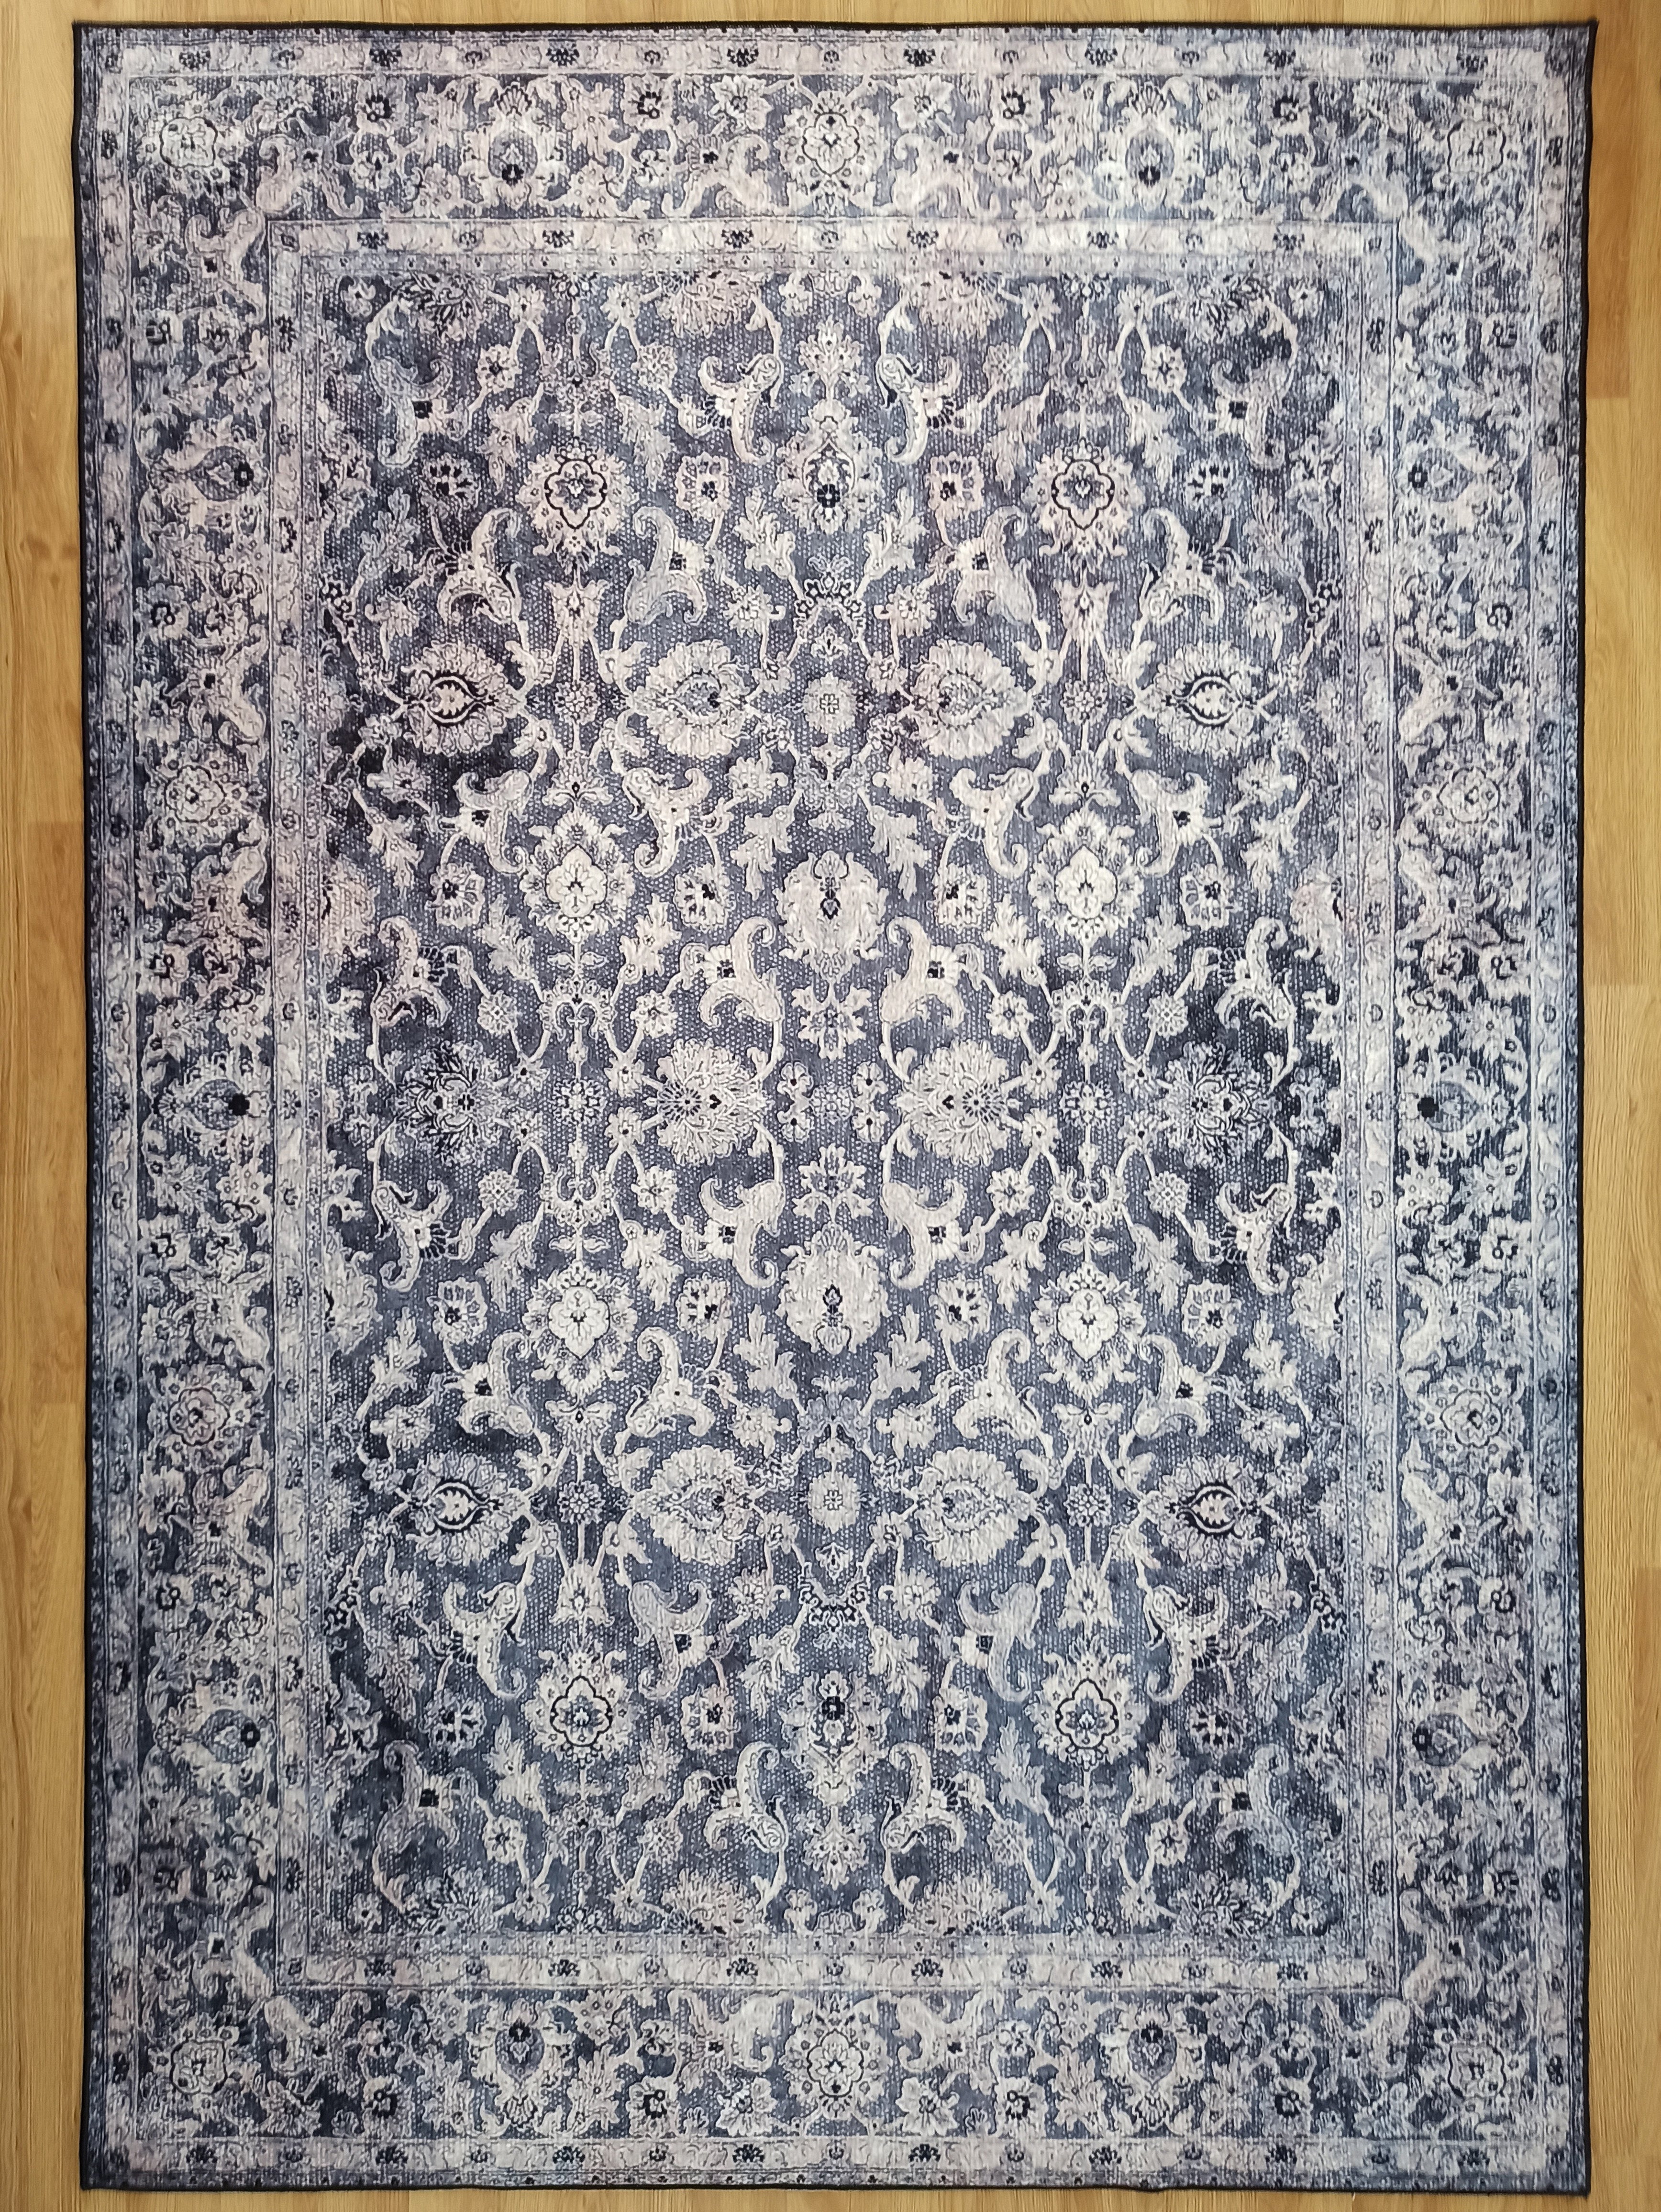 ASENA | Persian Area Rug, Navy Blue Gray Faded Distressed Vintage style, Unique Floral Design, Home Decor, Mid-century Art Teppich Rugs